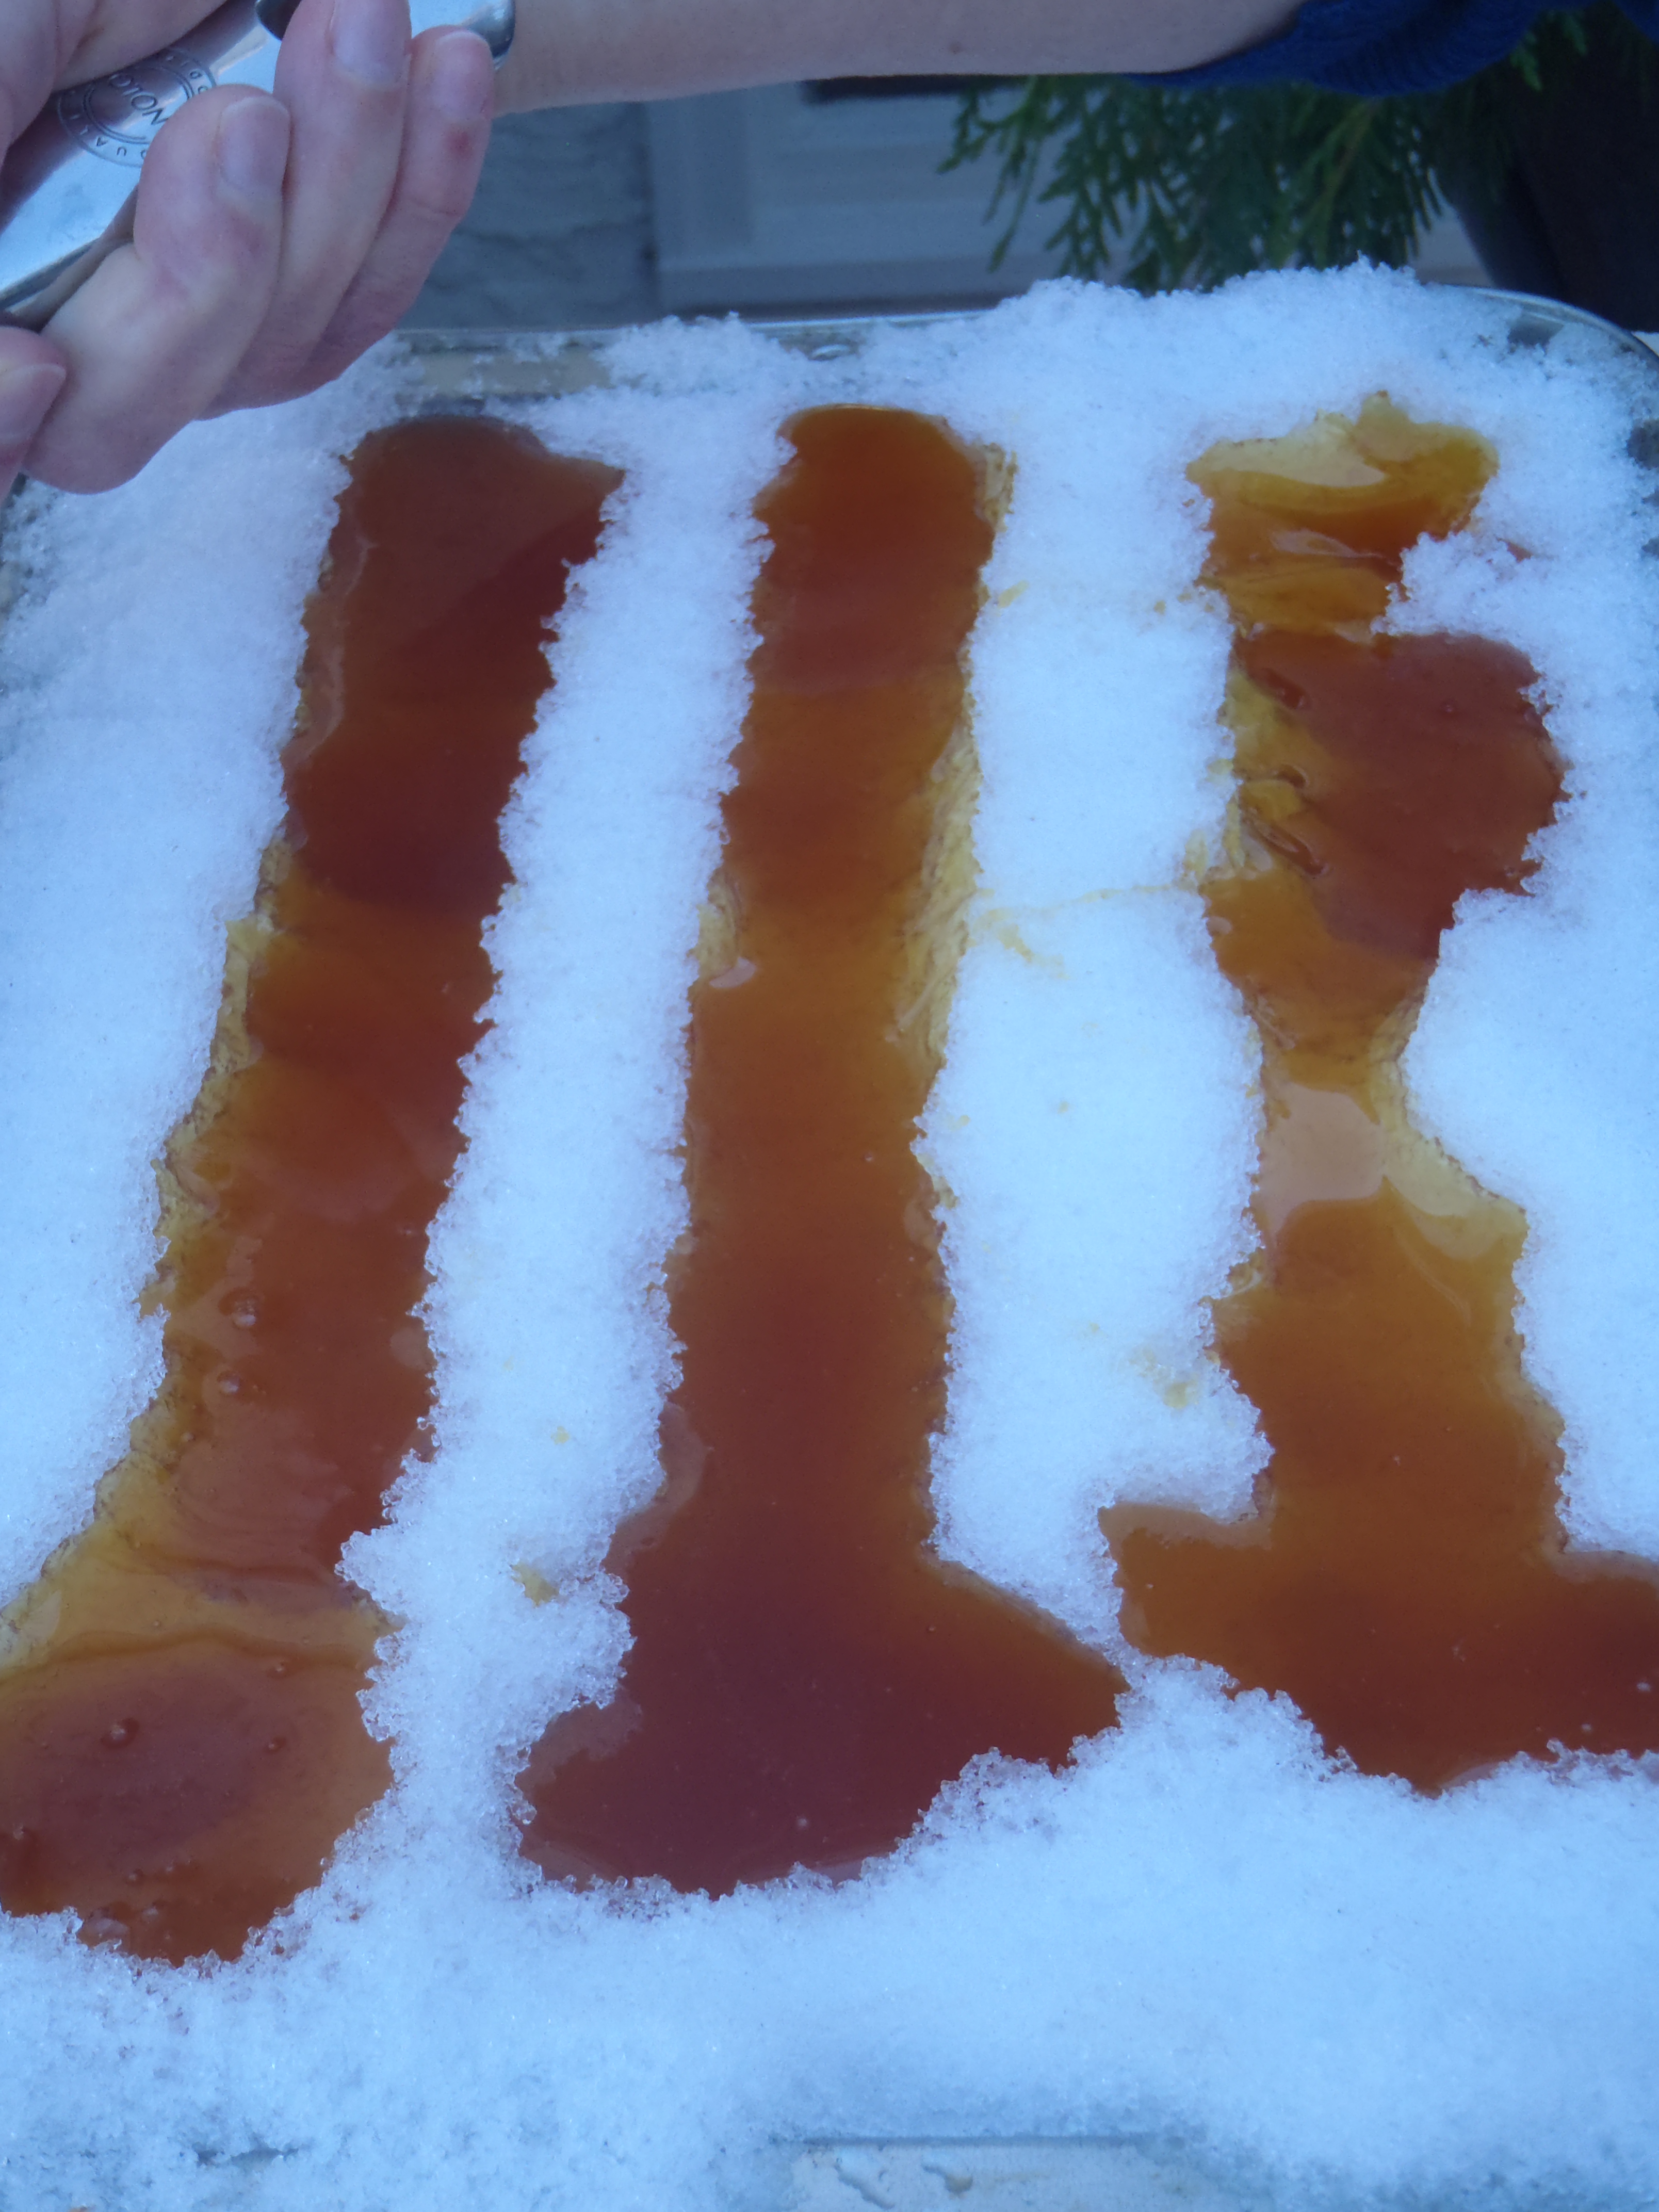 Pouring maple syrup onto fresh snow